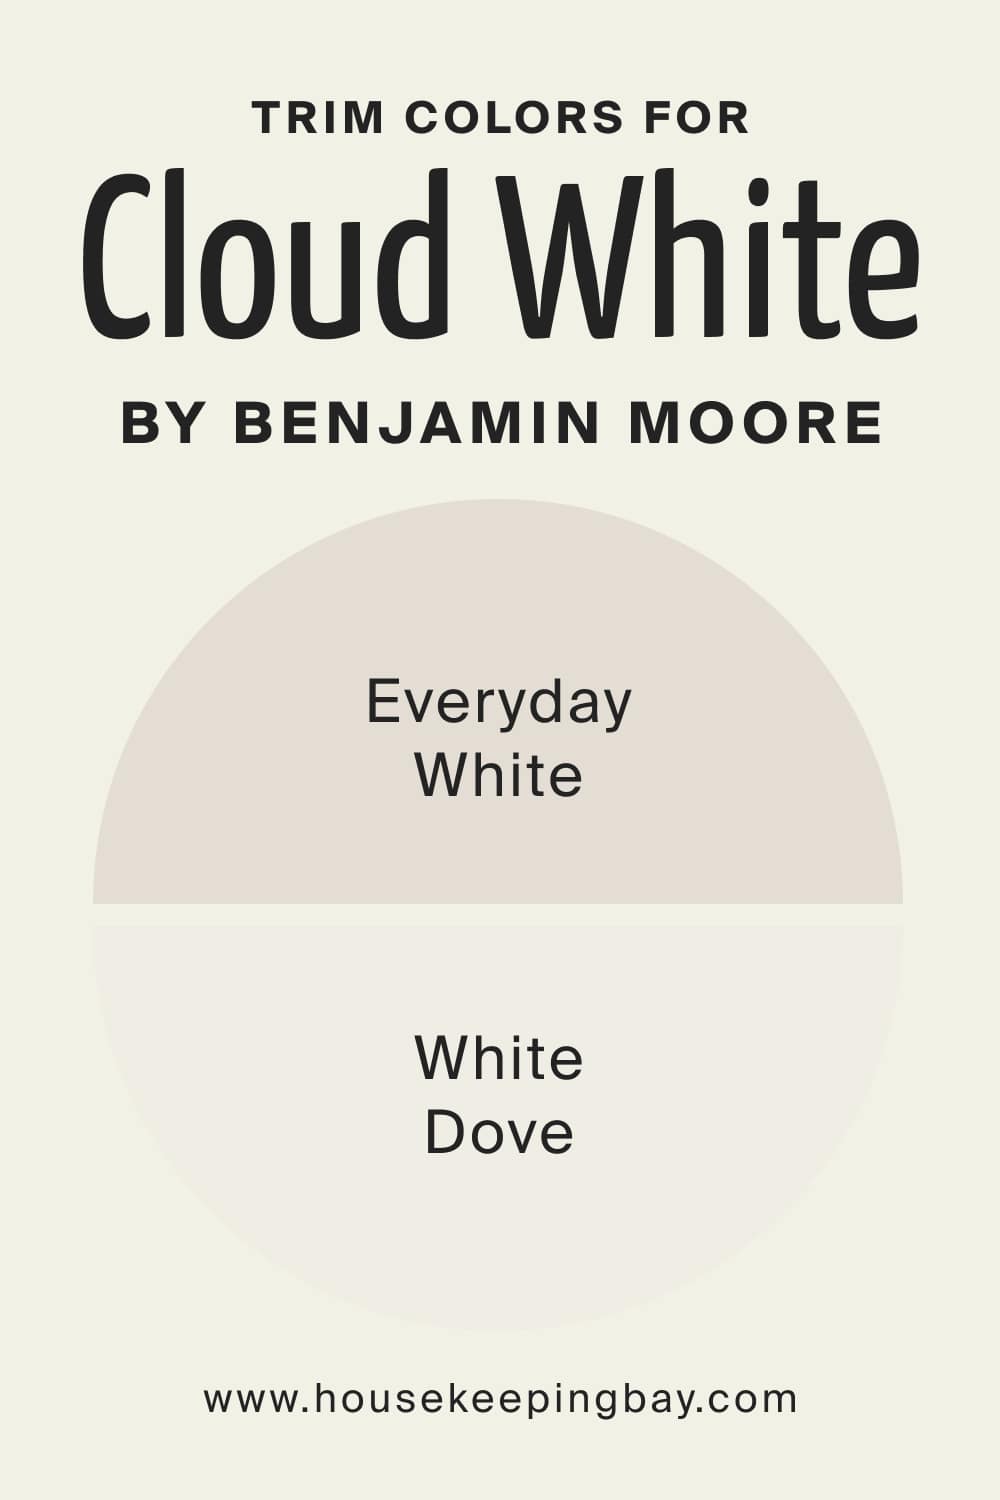 Trim Colors for Cloud White OC 130 by Benjamin Moore